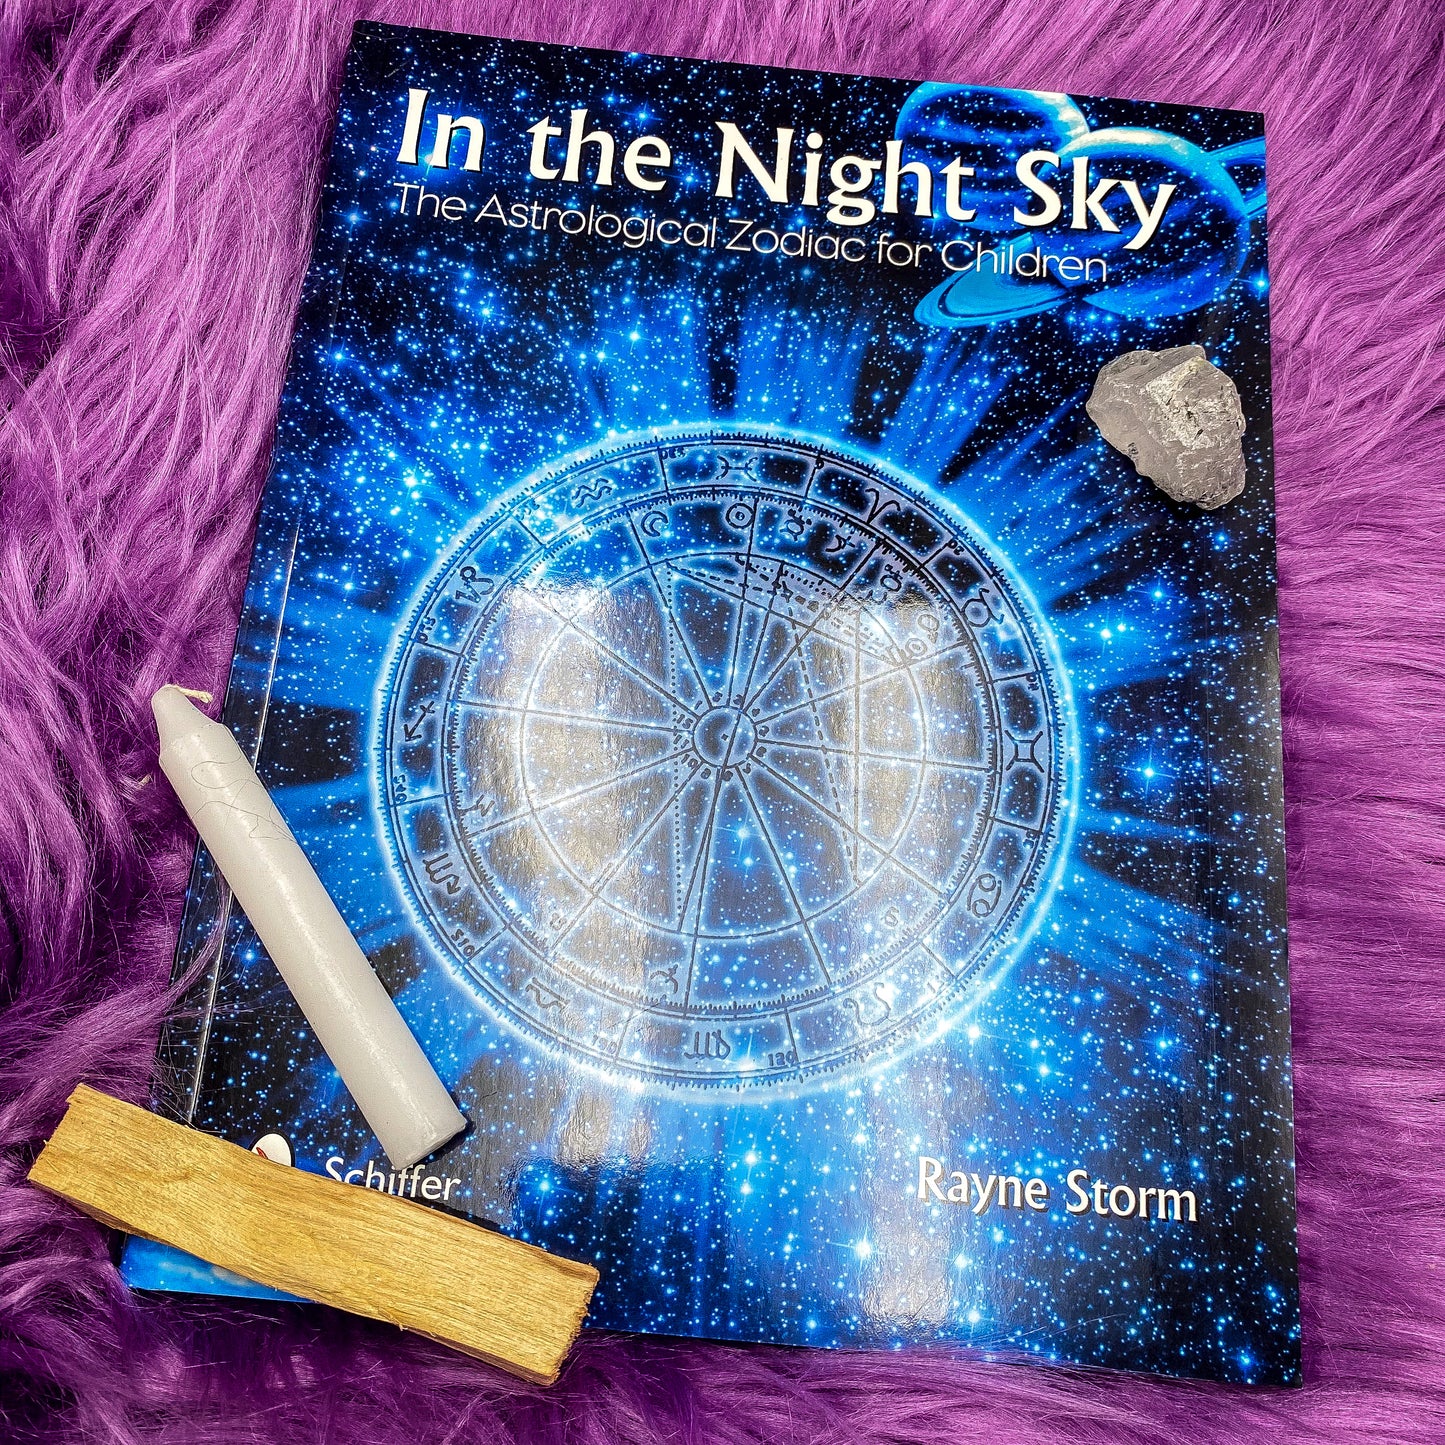 In the Night Sky: The Astrological Zodiac for Children by Rayne Storm